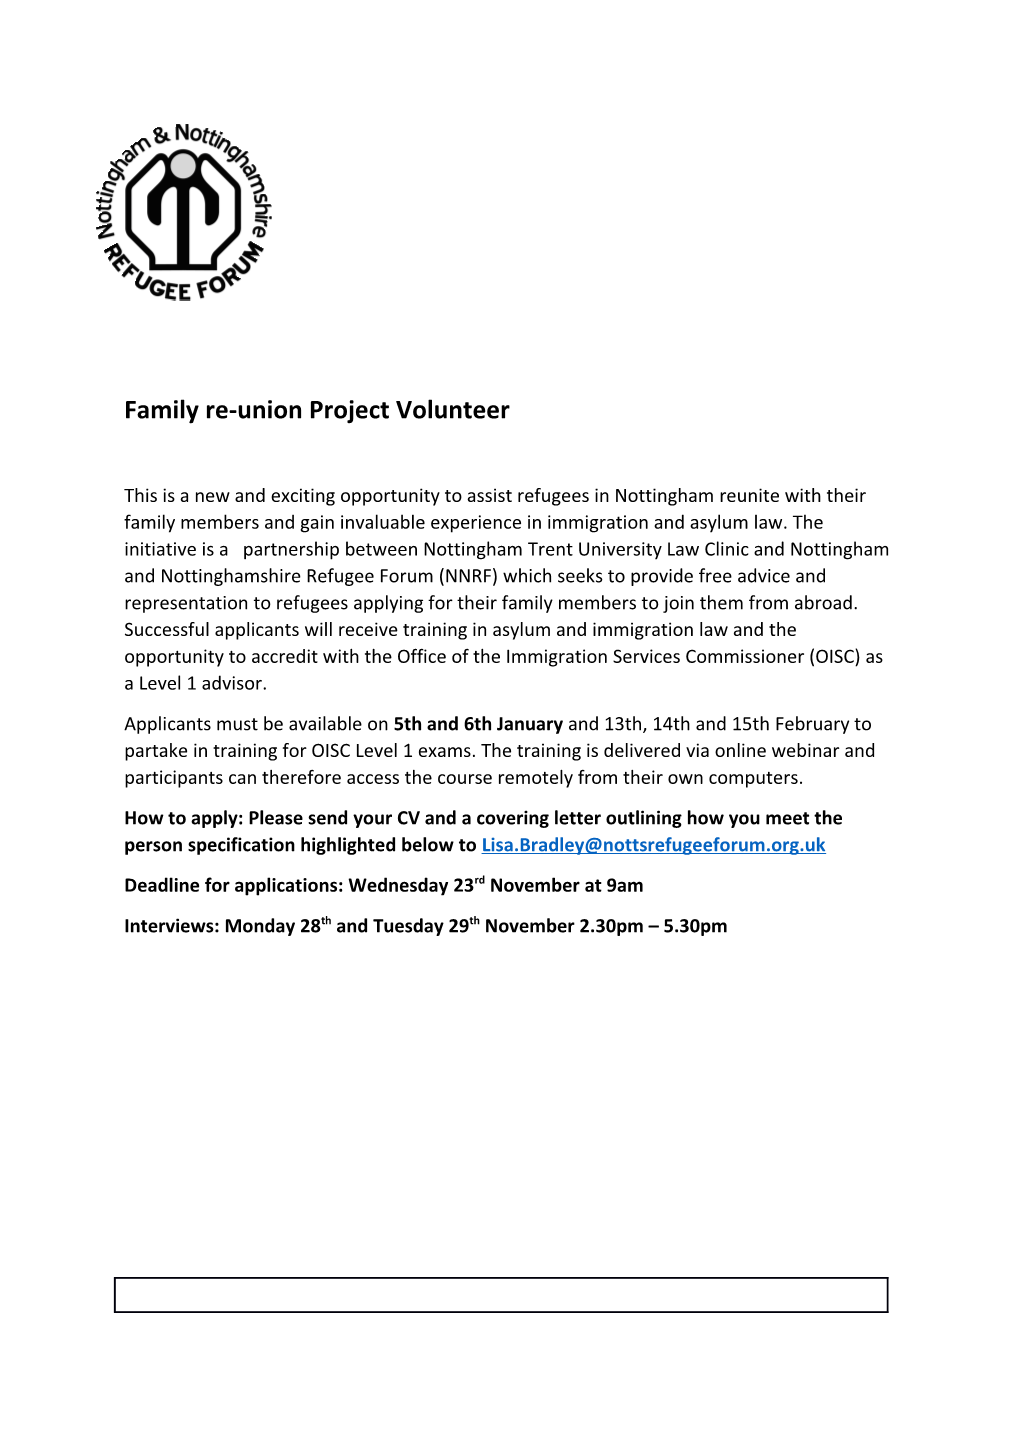 Family Re-Union Project Volunteer